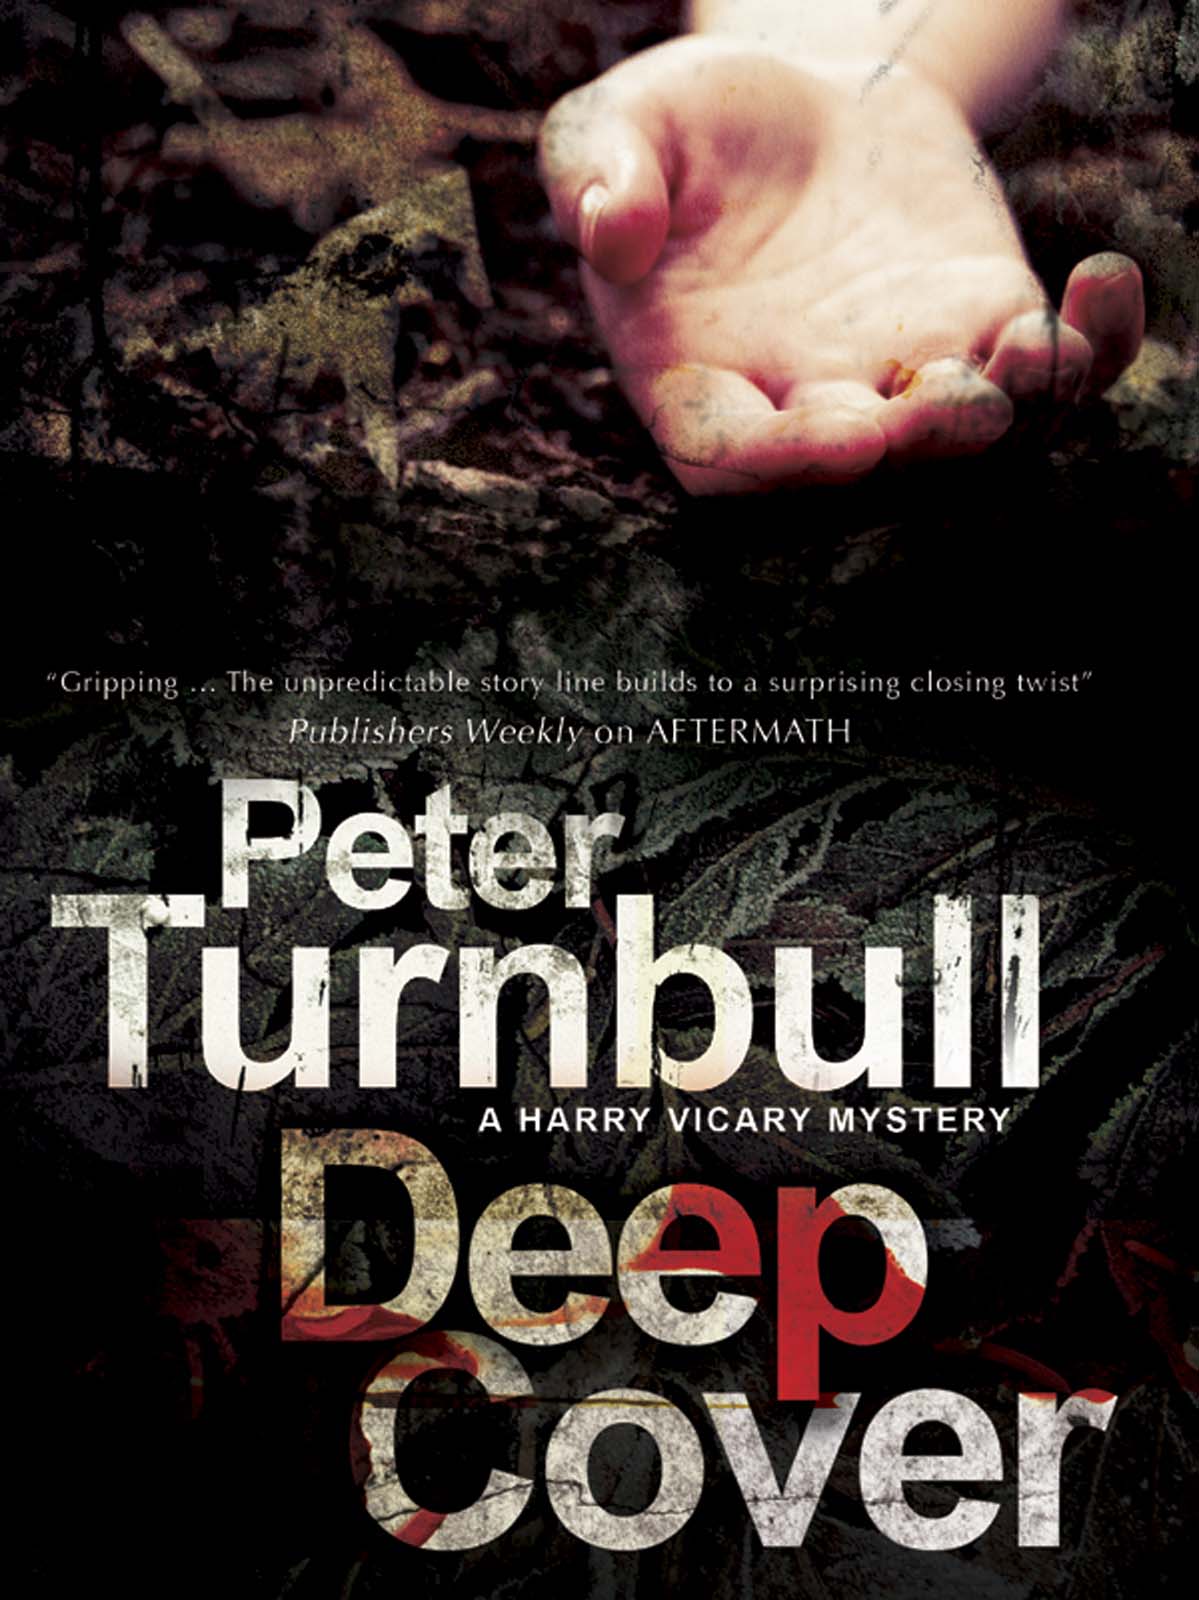 Deep Cover by Peter Turnbull